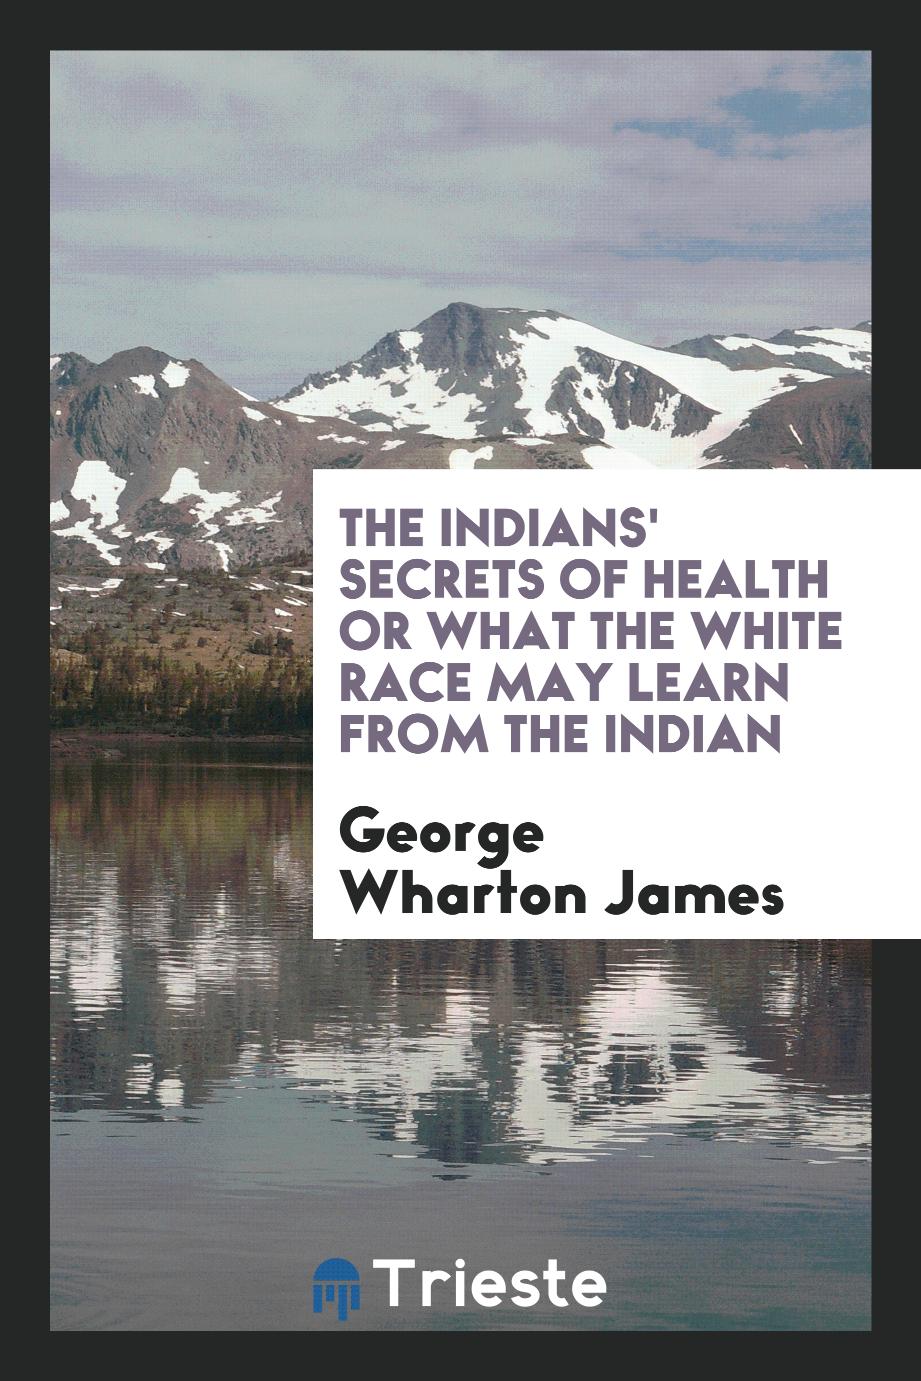 The Indians' secrets of health or What the white race may learn from the Indian